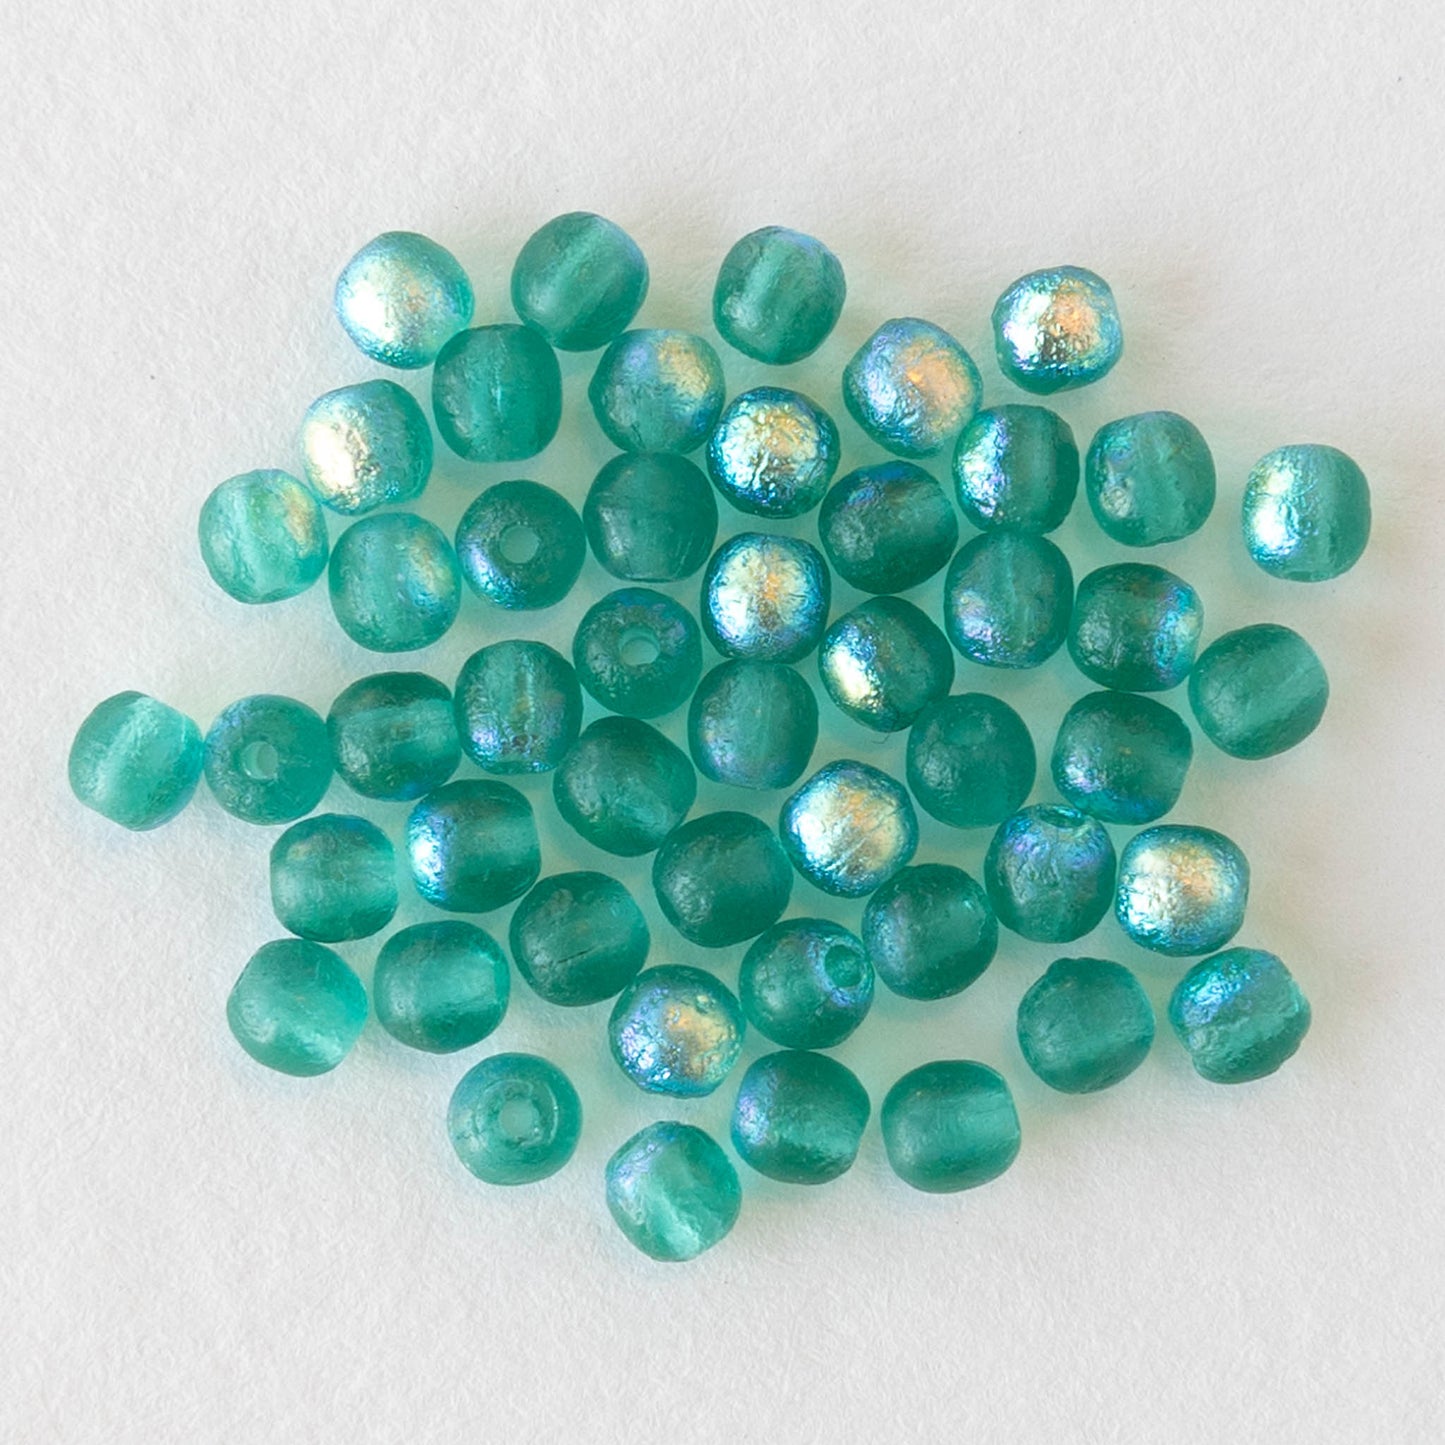 3mm Round Glass Beads - Etched Seafoam AB - 50 Beads